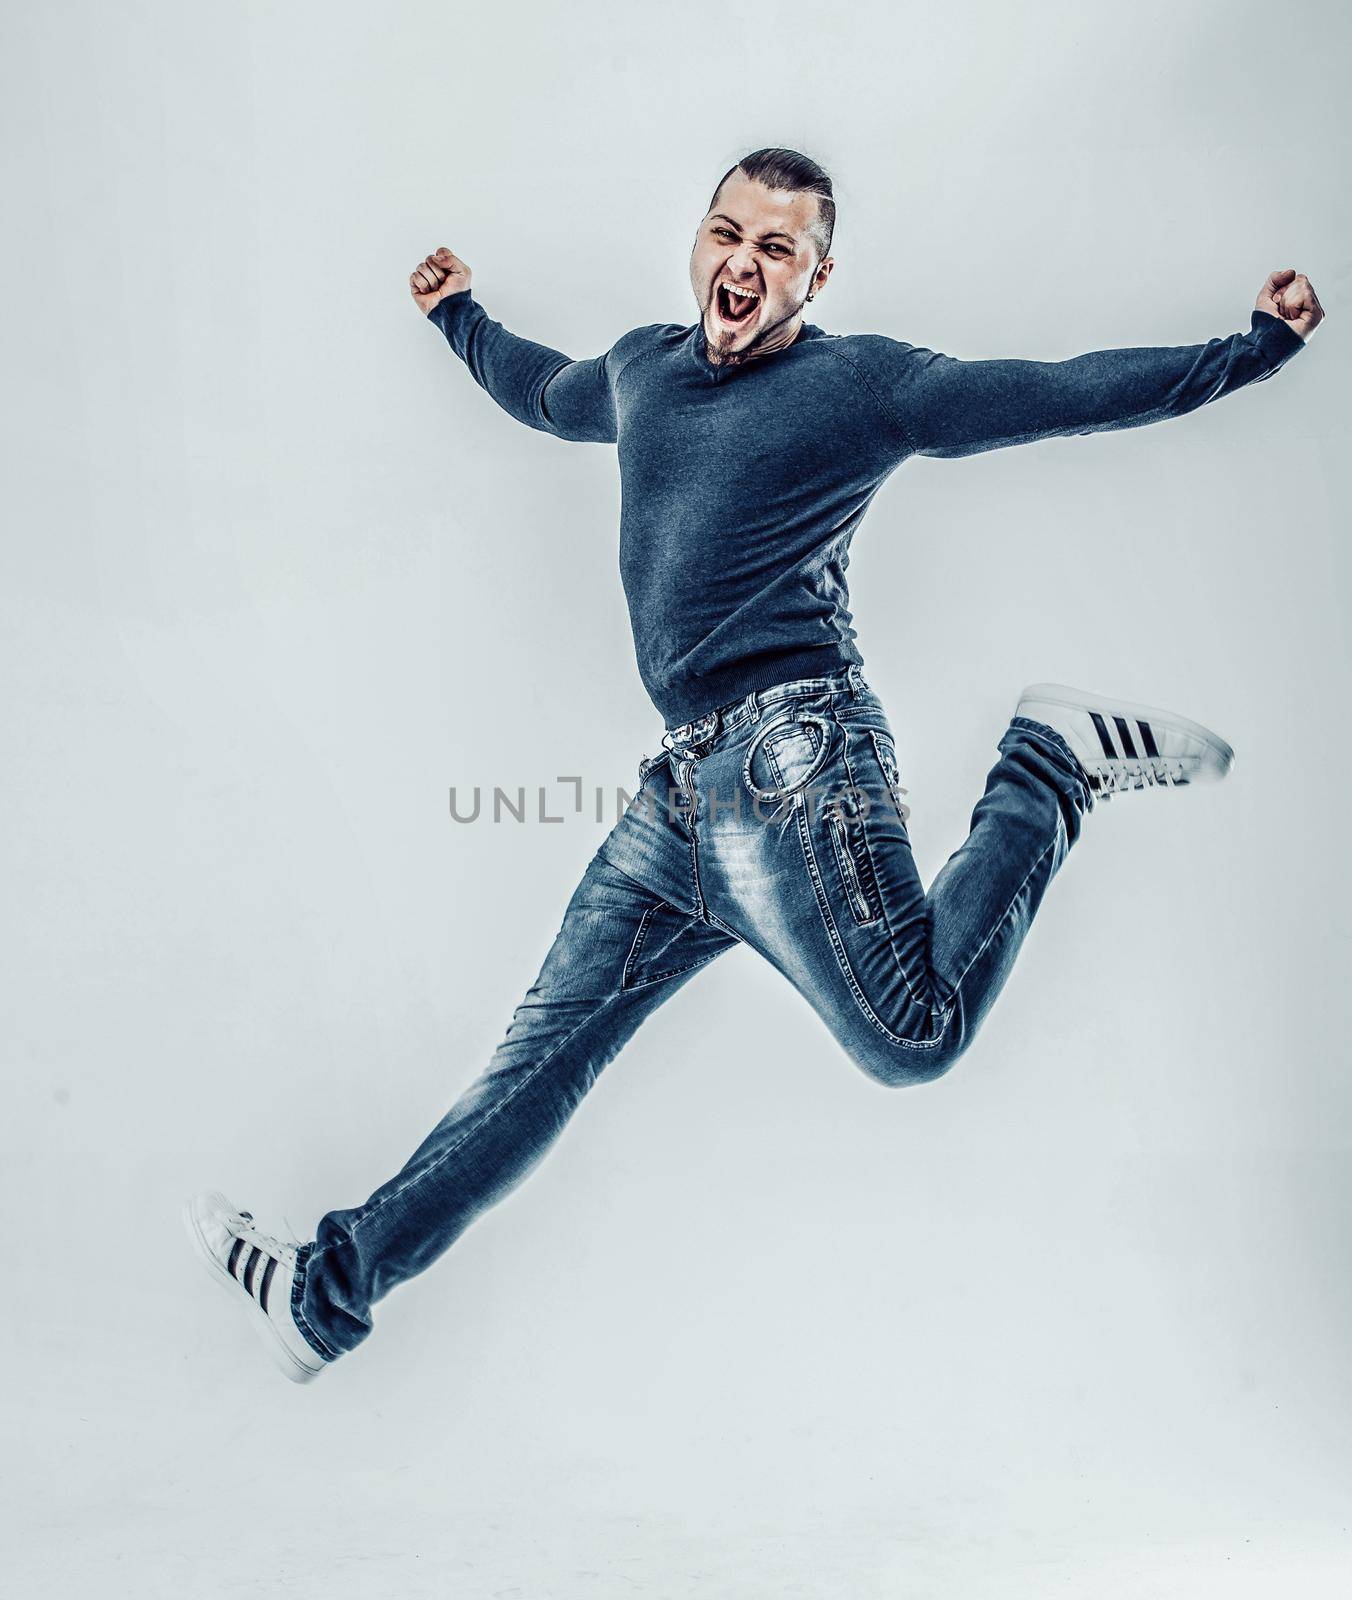 A young boy jumps for joy and happiness and raises her arms up on white background